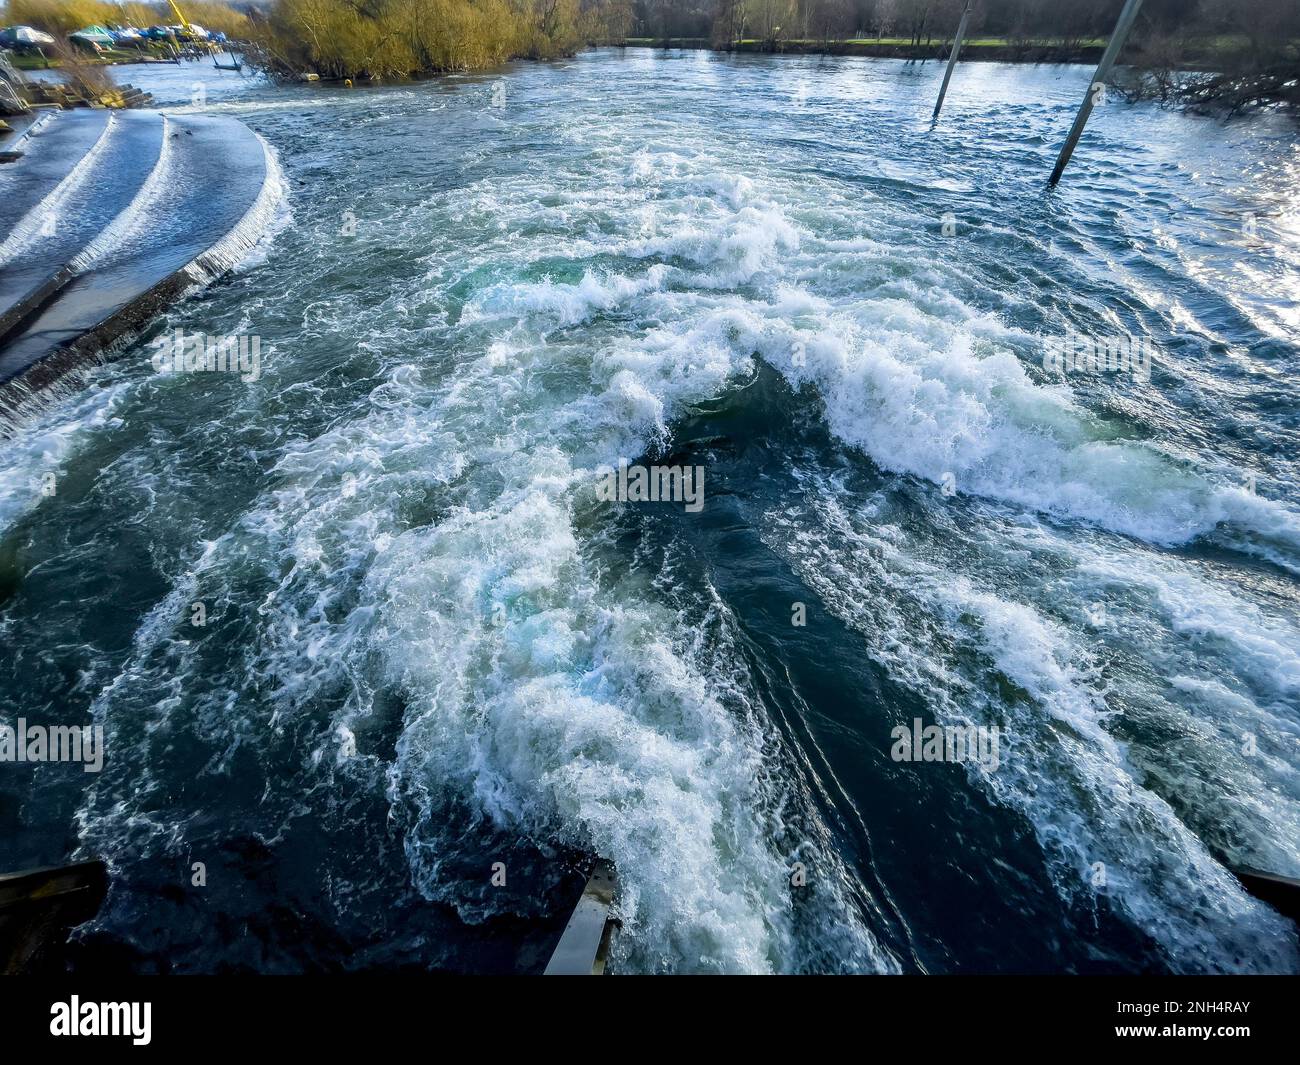 Fast flowing white water on the River Thames at Hambledon weir near Henley-on-Thames, Oxfordshire, England, UK Stock Photo